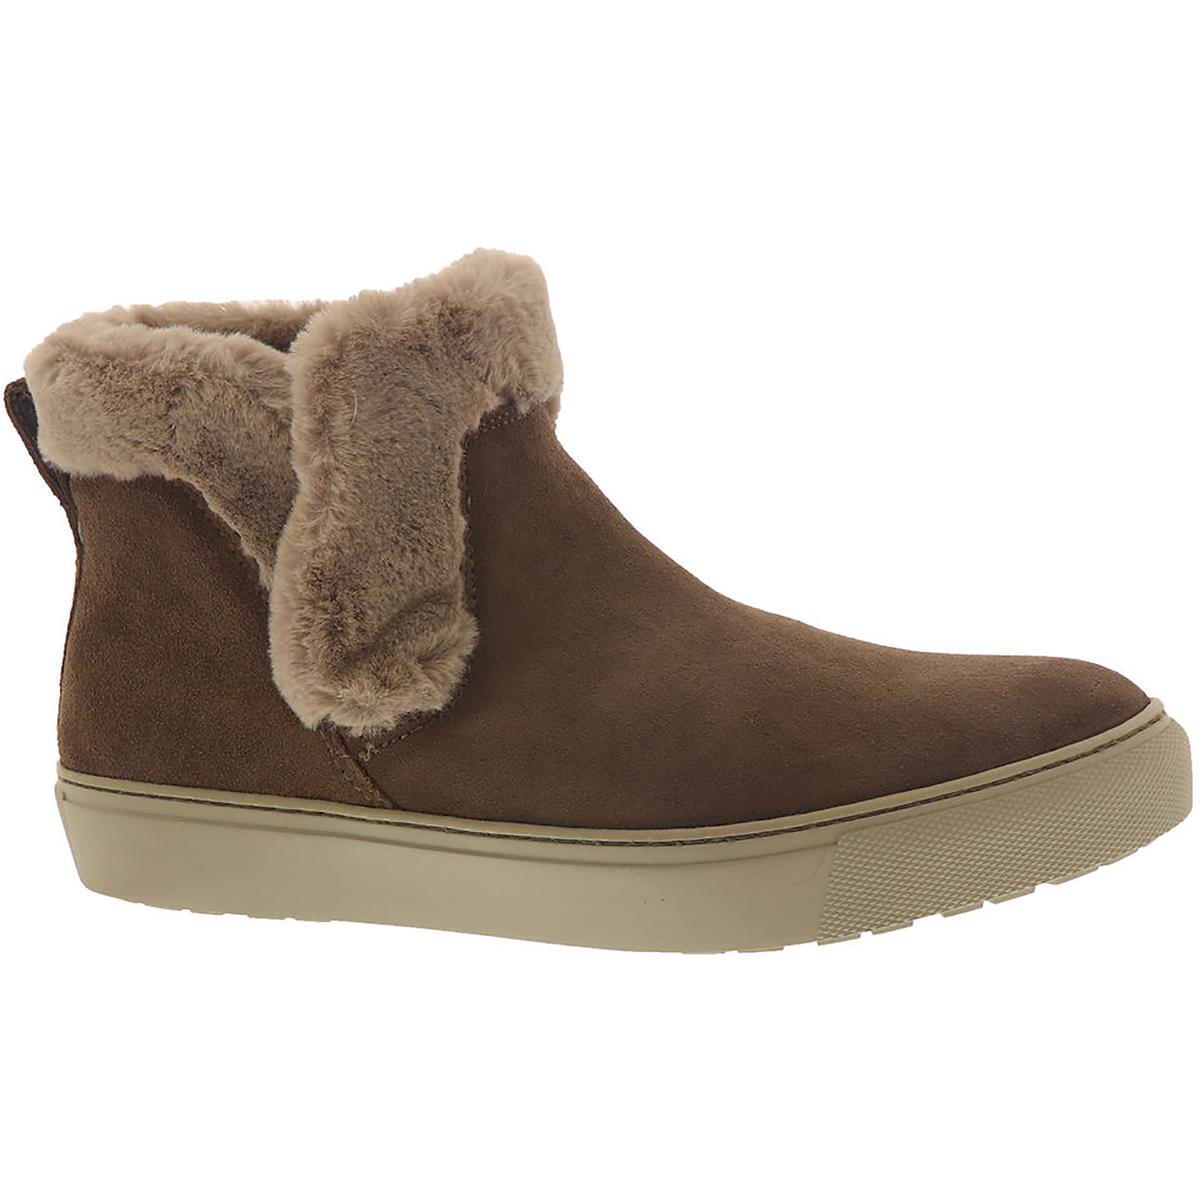 Cougar Womens Duffy Synthetic Faux Fur Trim Ankle Boots Shoes BHFO 5203